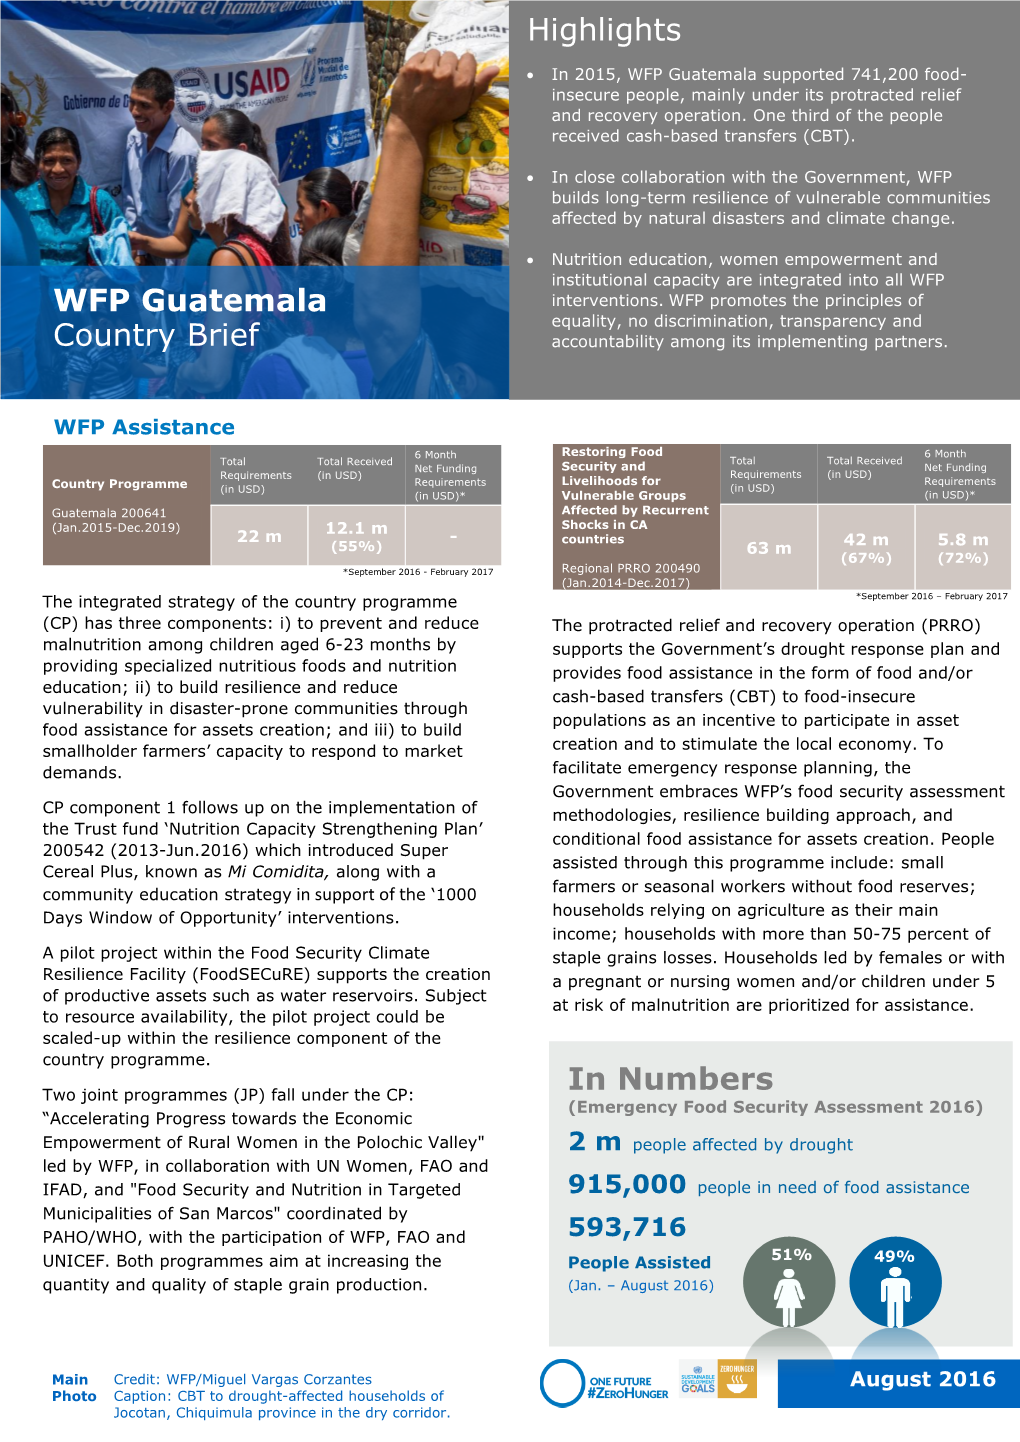 WFP Guatemala Supported 741,200 Food- Insecure People, Mainly Under Its Protracted Relief and Recovery Operation